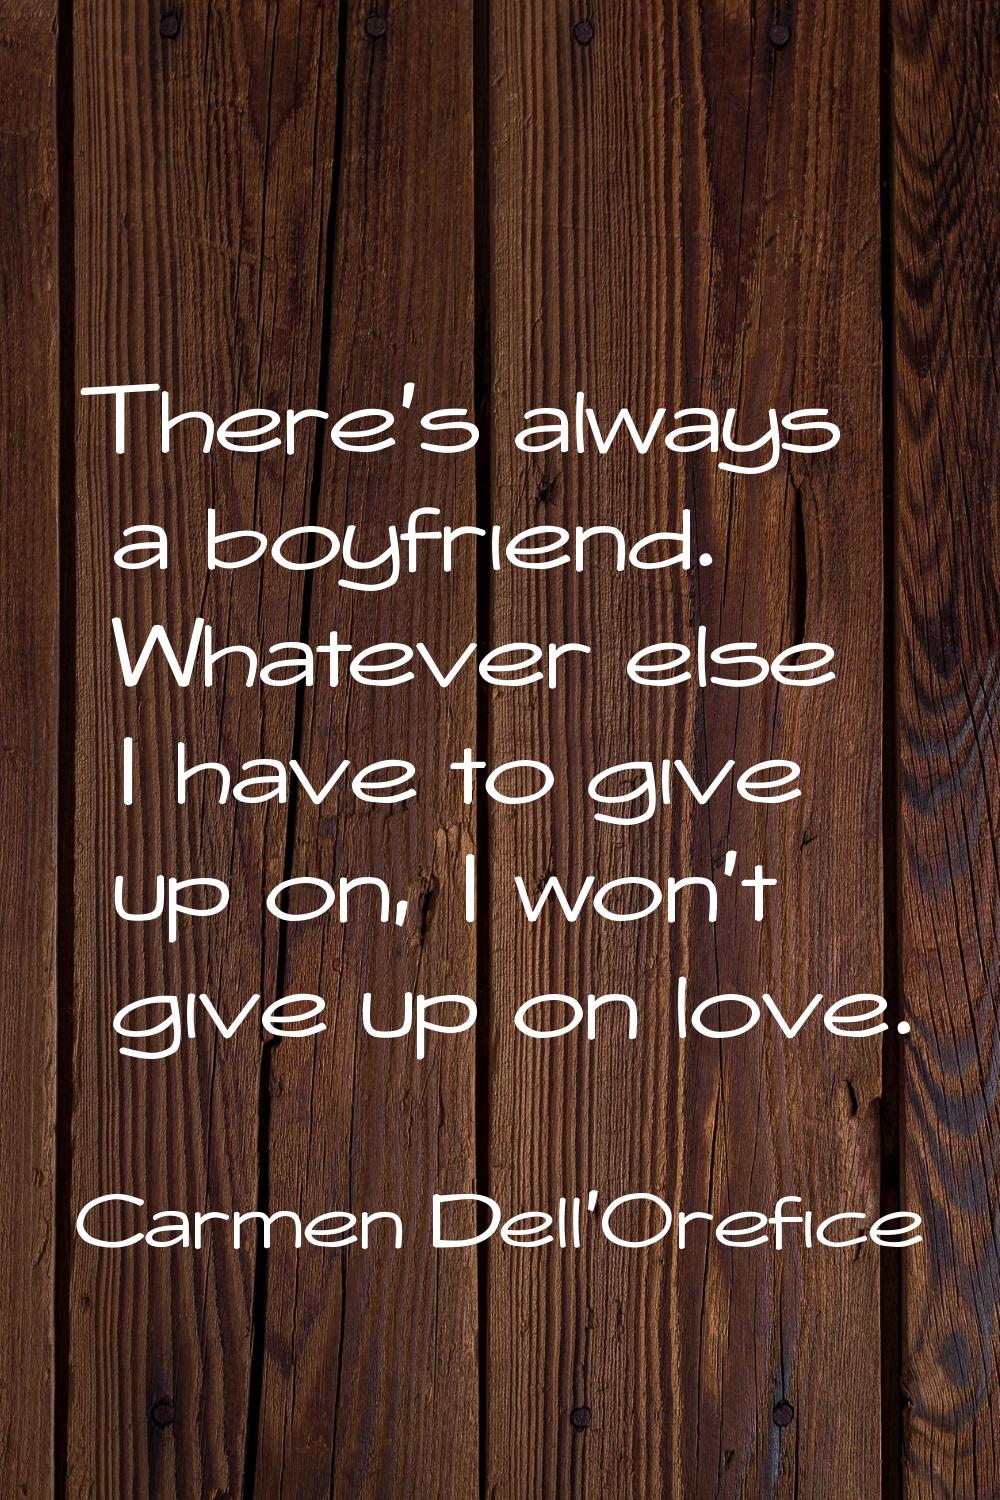 There's always a boyfriend. Whatever else I have to give up on, I won't give up on love.